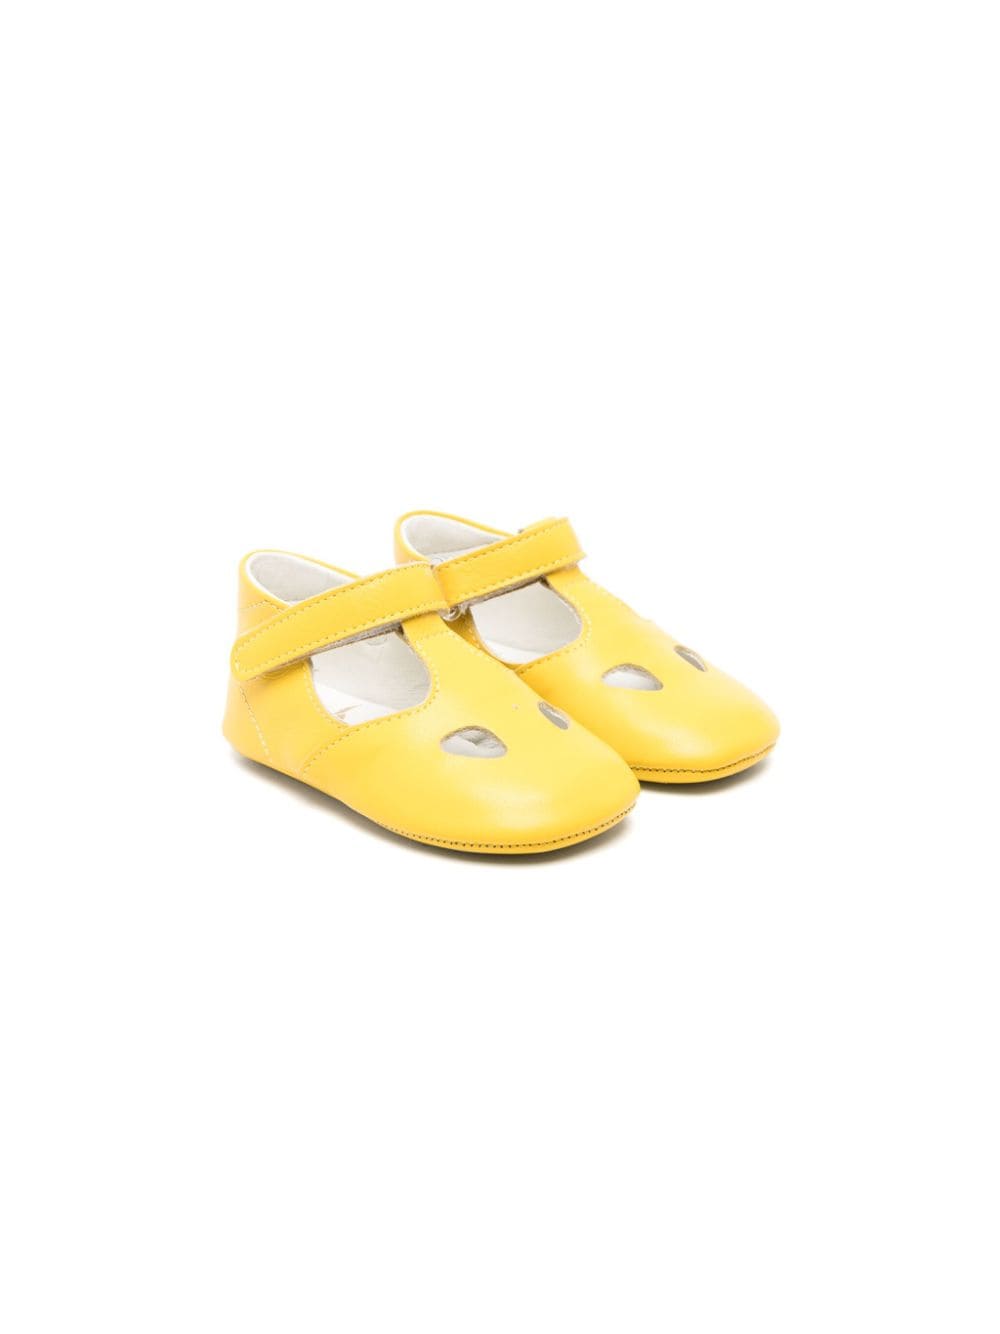 Gallucci Babies' Cut-out Leather Pre-walkers In Yellow